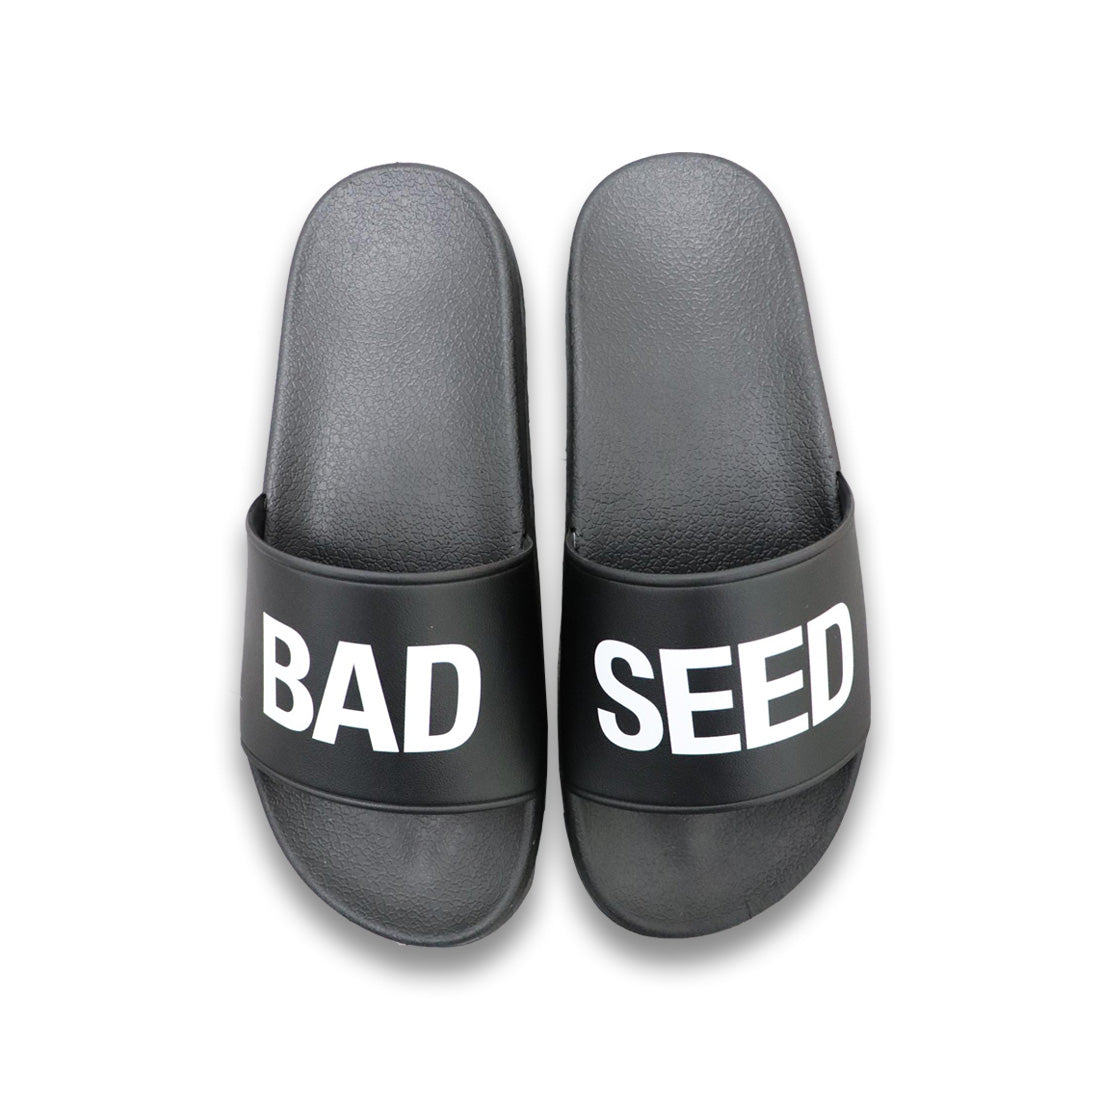 seed sale shoes